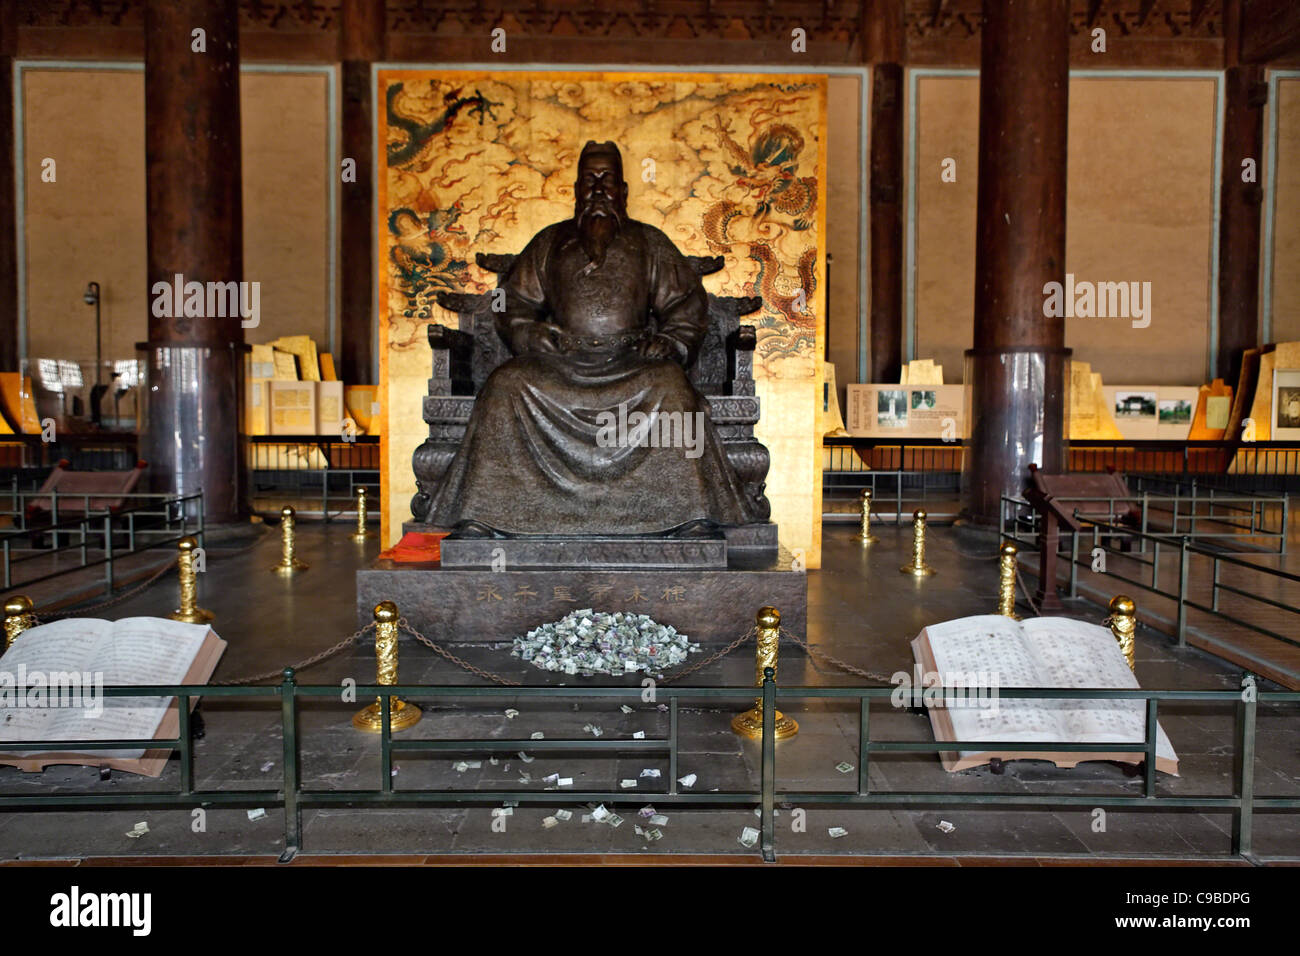 Emperor Yongle's Statue in the Ming Tombs, Changping District, Beijing, China Stock Photo